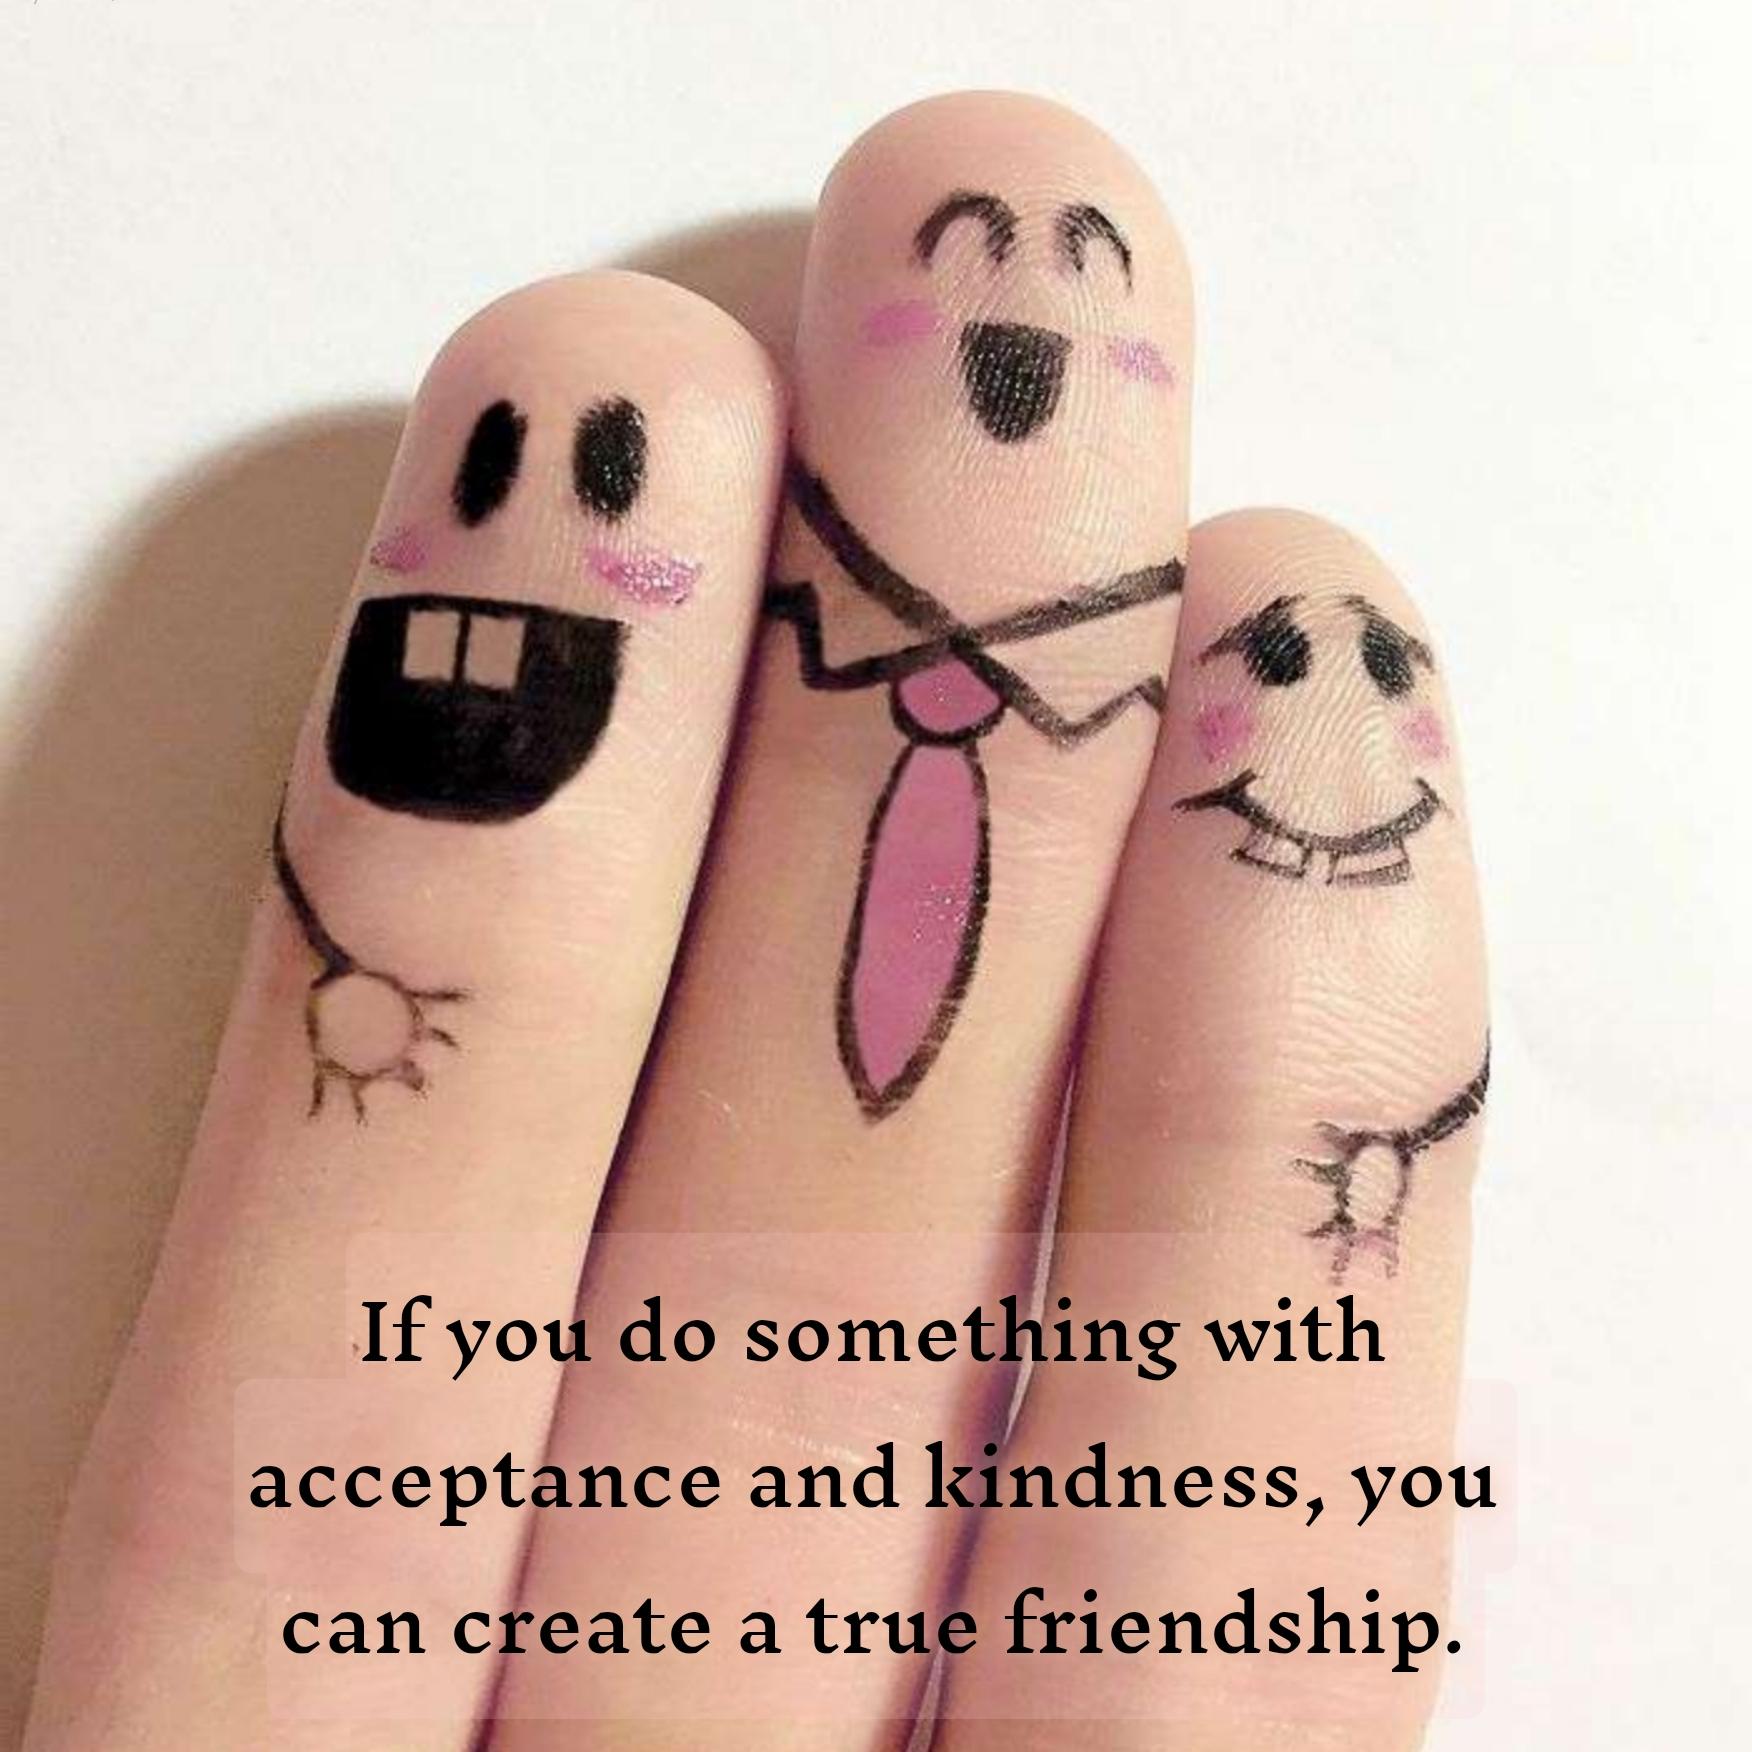 If you do something with acceptance and kindness you can create a true friendship